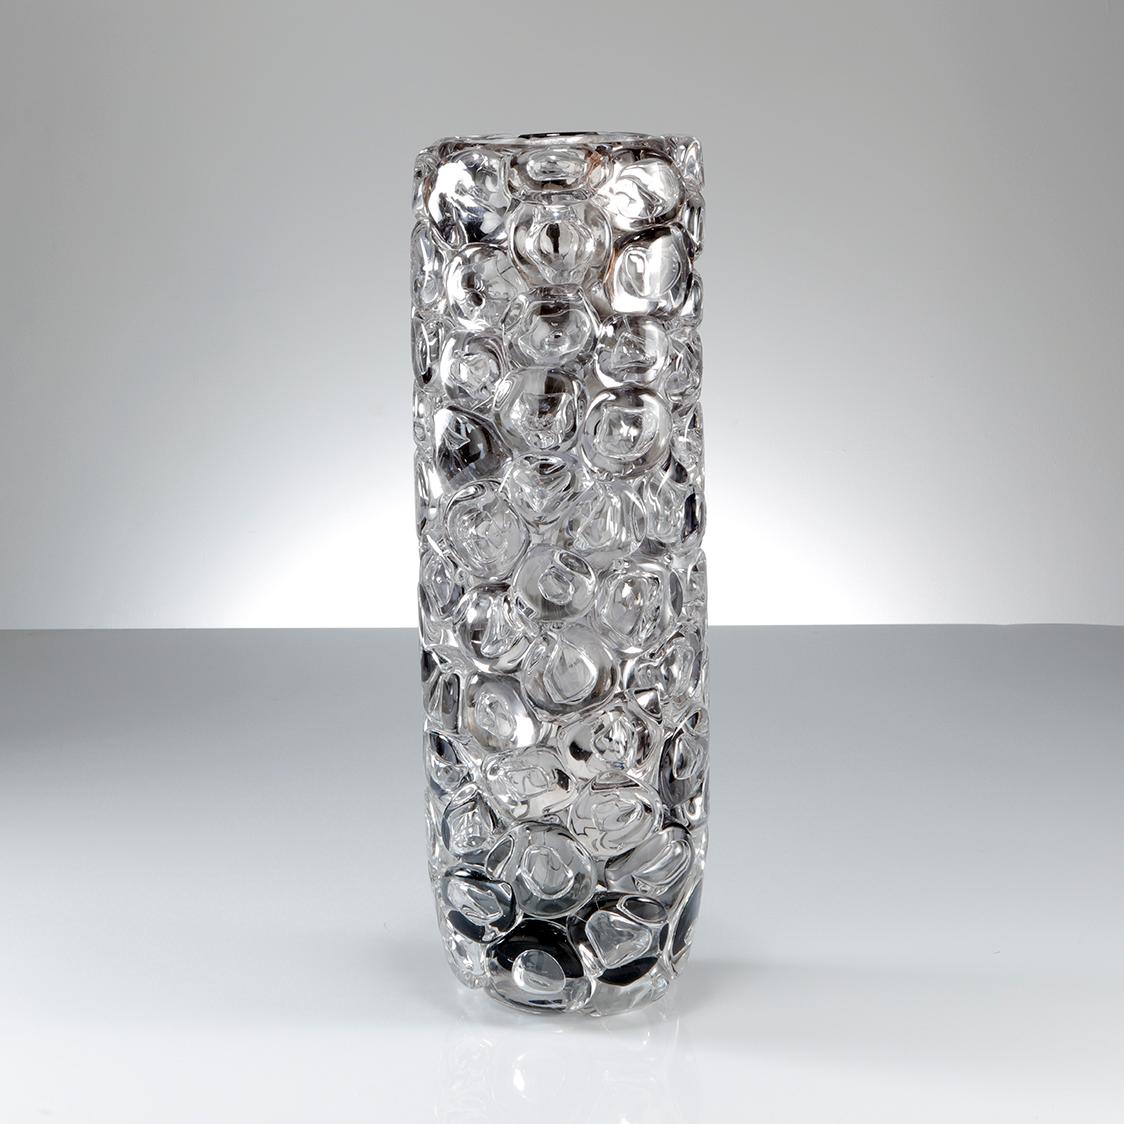 Bubblewrap in Monochrome II is a hand blown and sculpted vase created from clear and grey glass, with a mirrored interior by the British artist Allister Malcolm. Playful yet elegant, Malcolm has formed oversized bubbles on the exterior of this